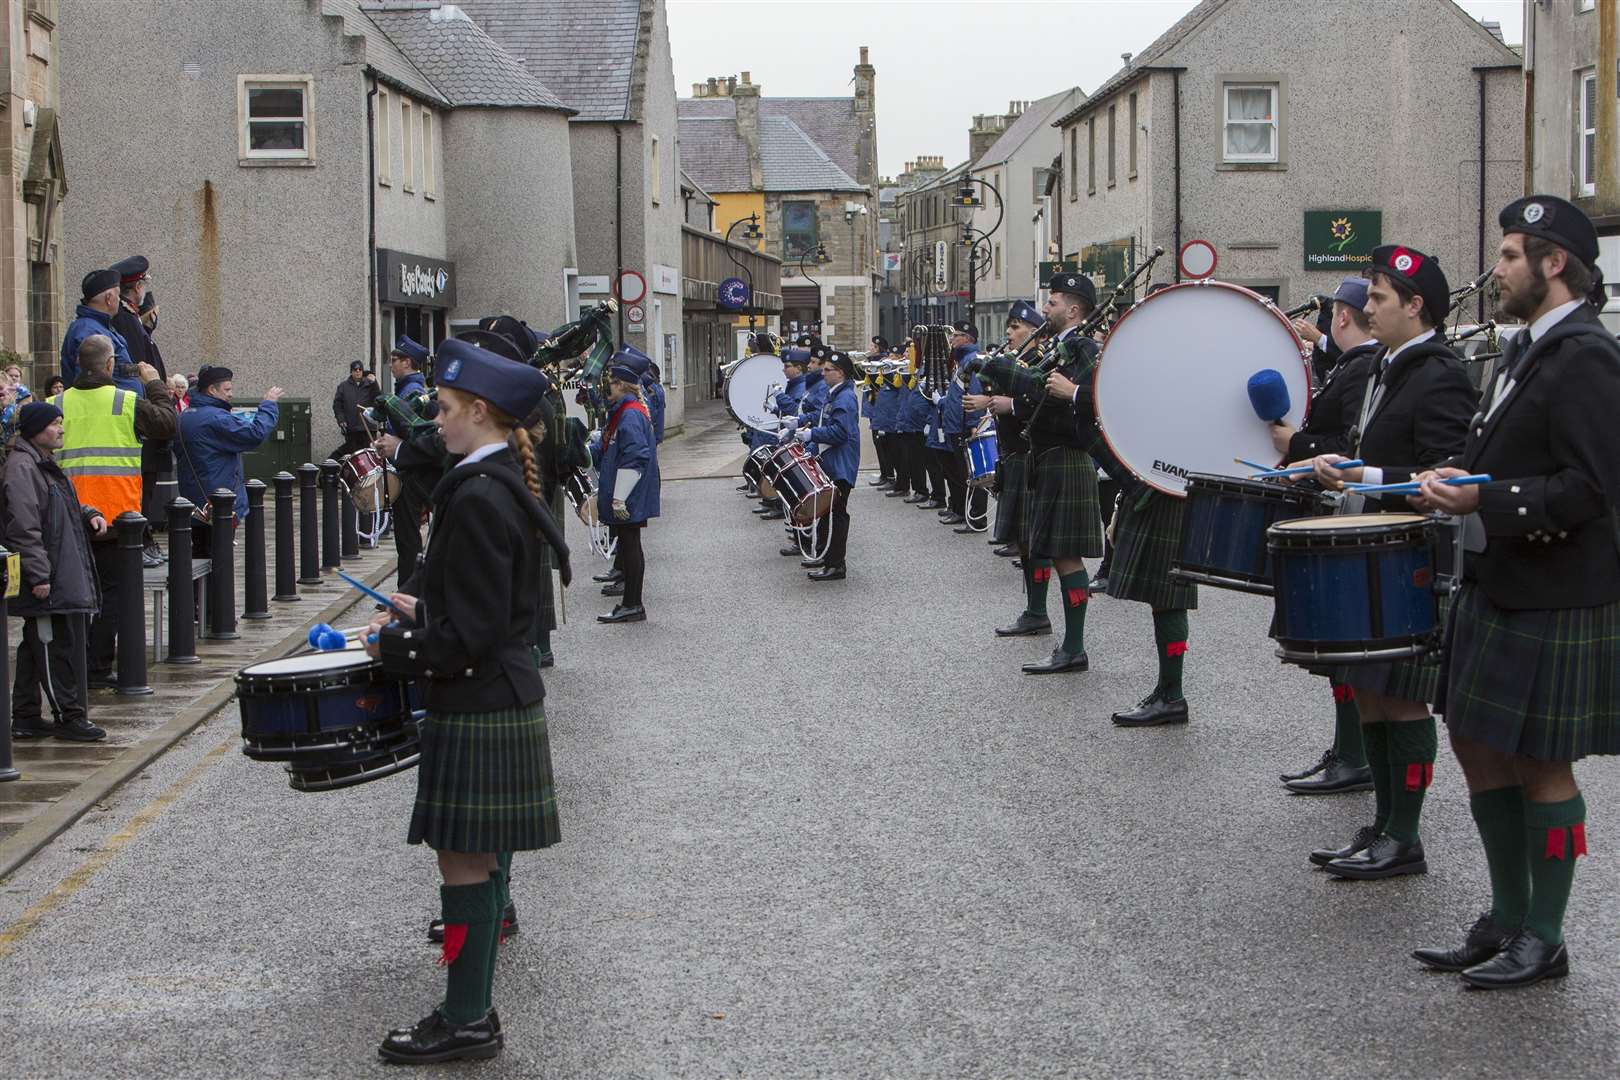 The Boys Brigade Tour Band, performed for around 15 minutes in the Thurso town centre, before marching out to Pennyland House, where the organisation's founder was born 140 years ago